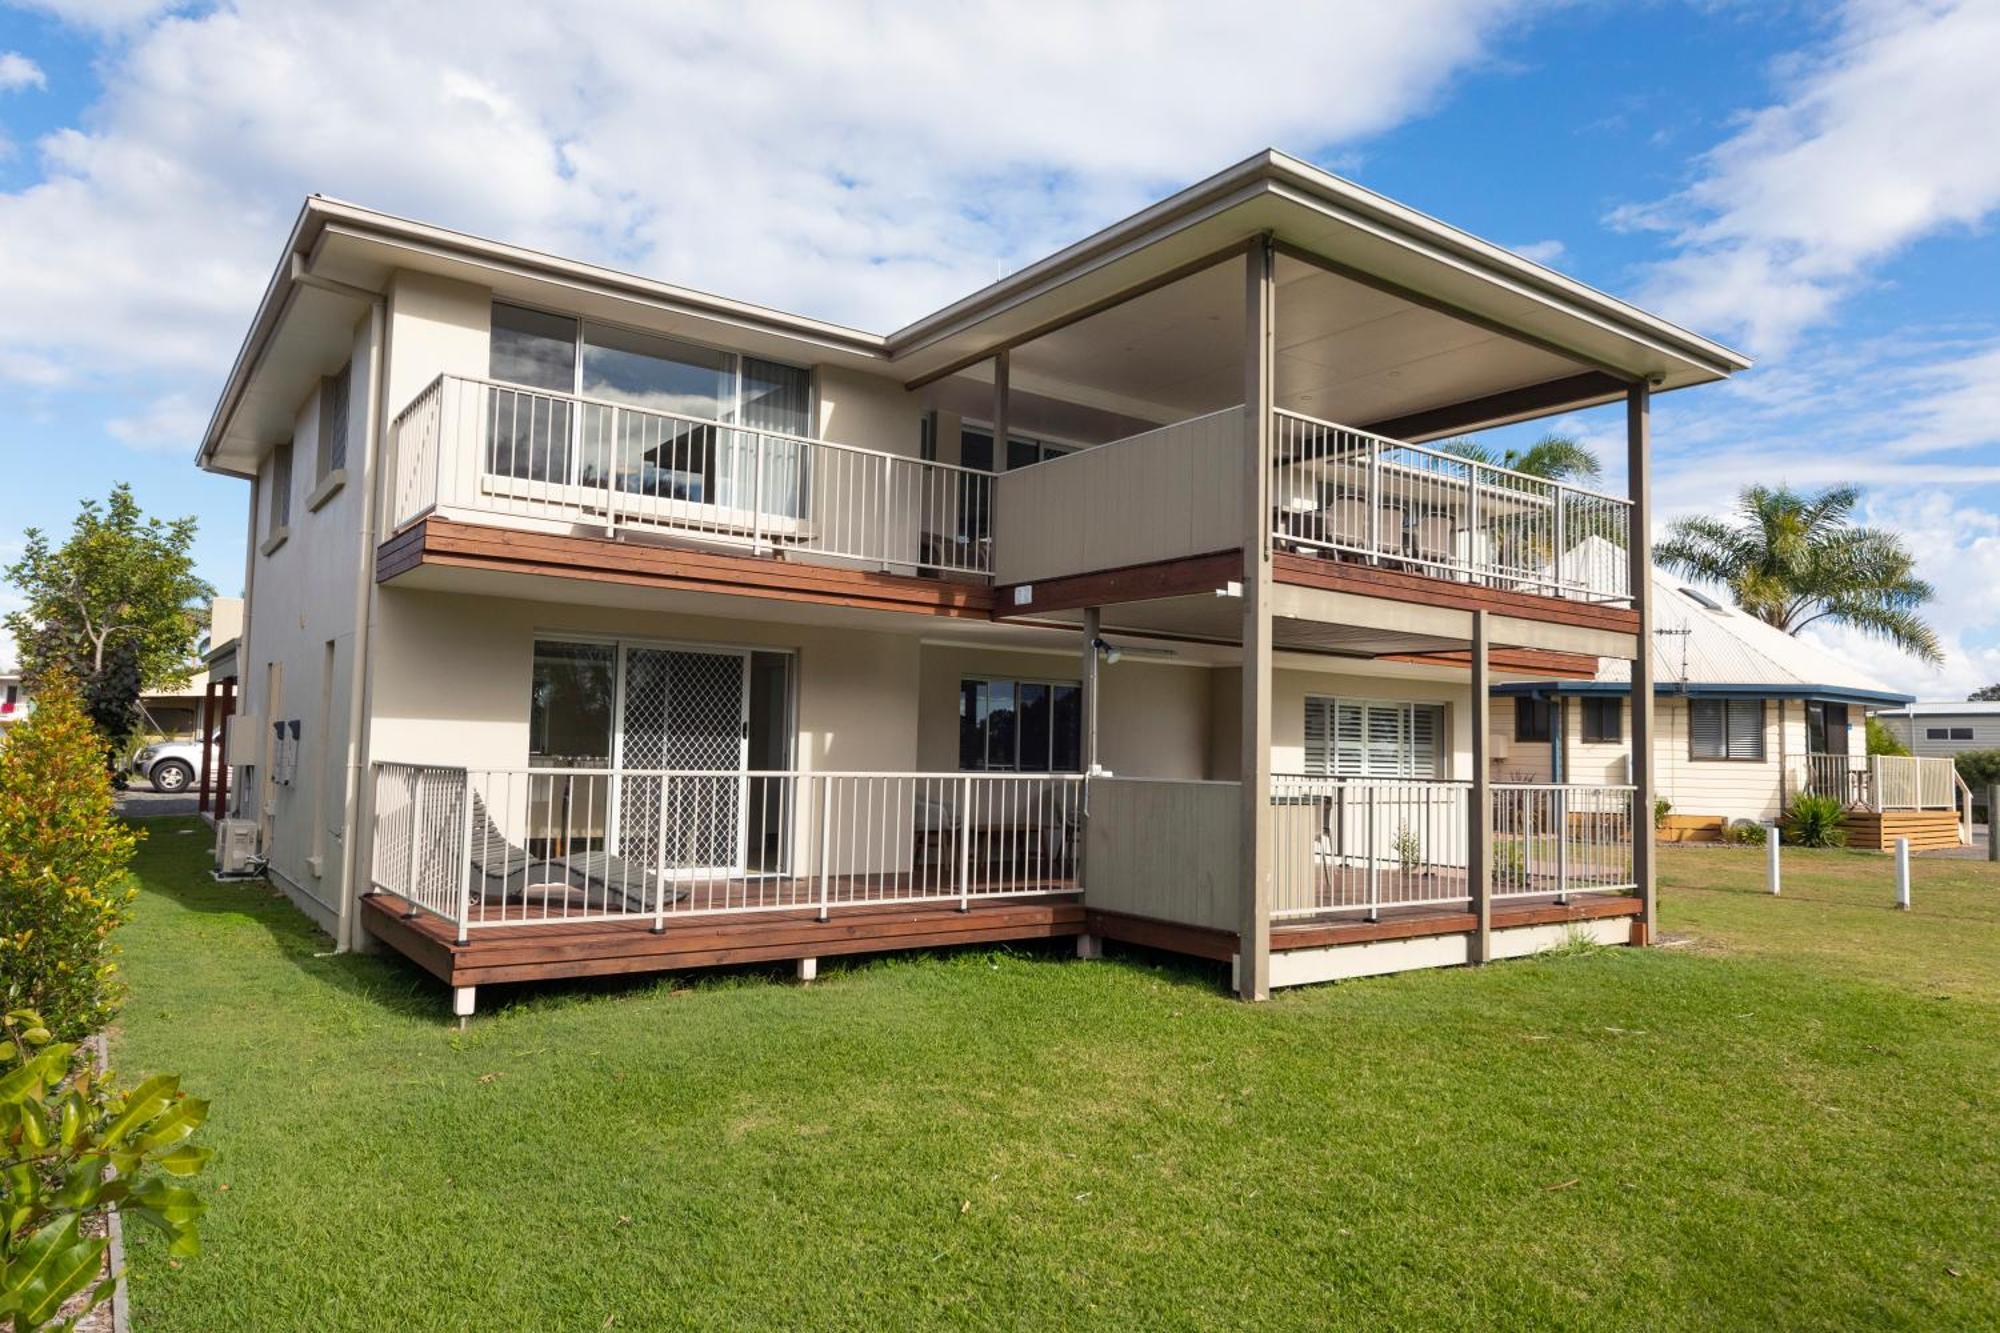 Nrma Forster Tuncurry Hotel Exterior foto